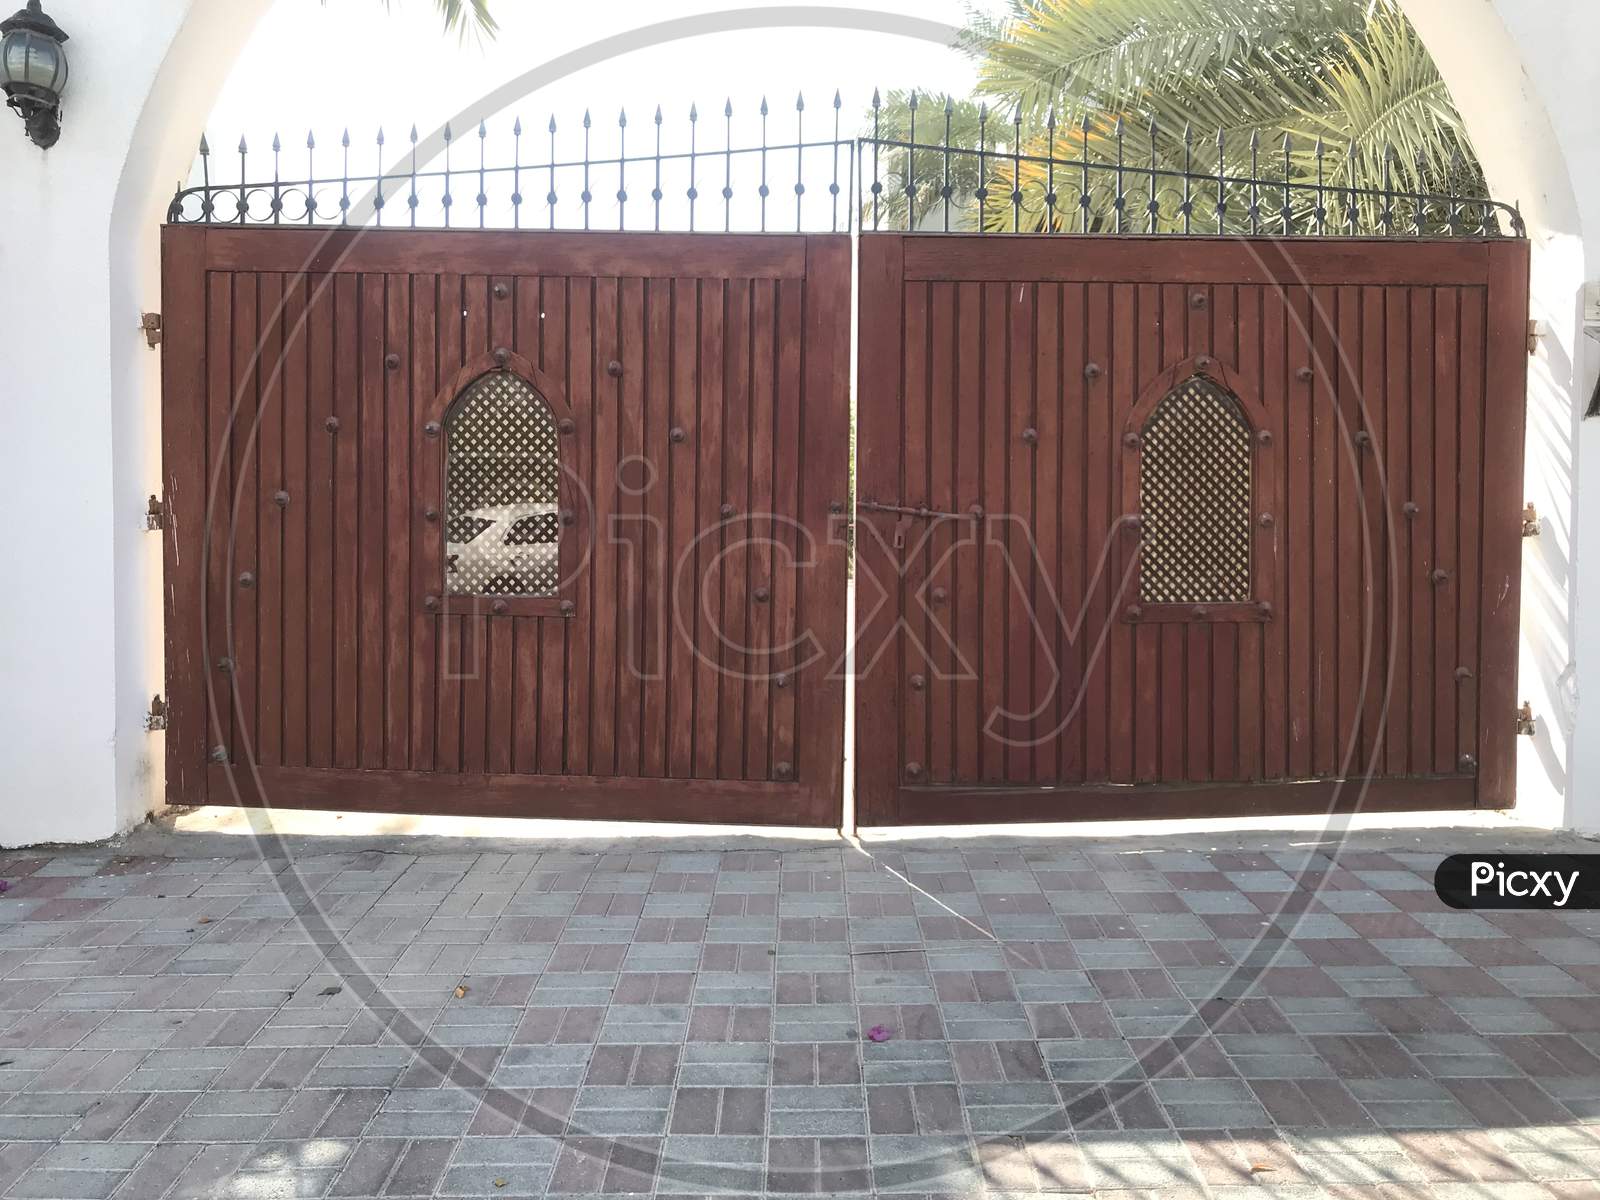 Wooden Shutter With Steel Framed Gate For An Big Villa And Two Openings For Identification Of Personnel